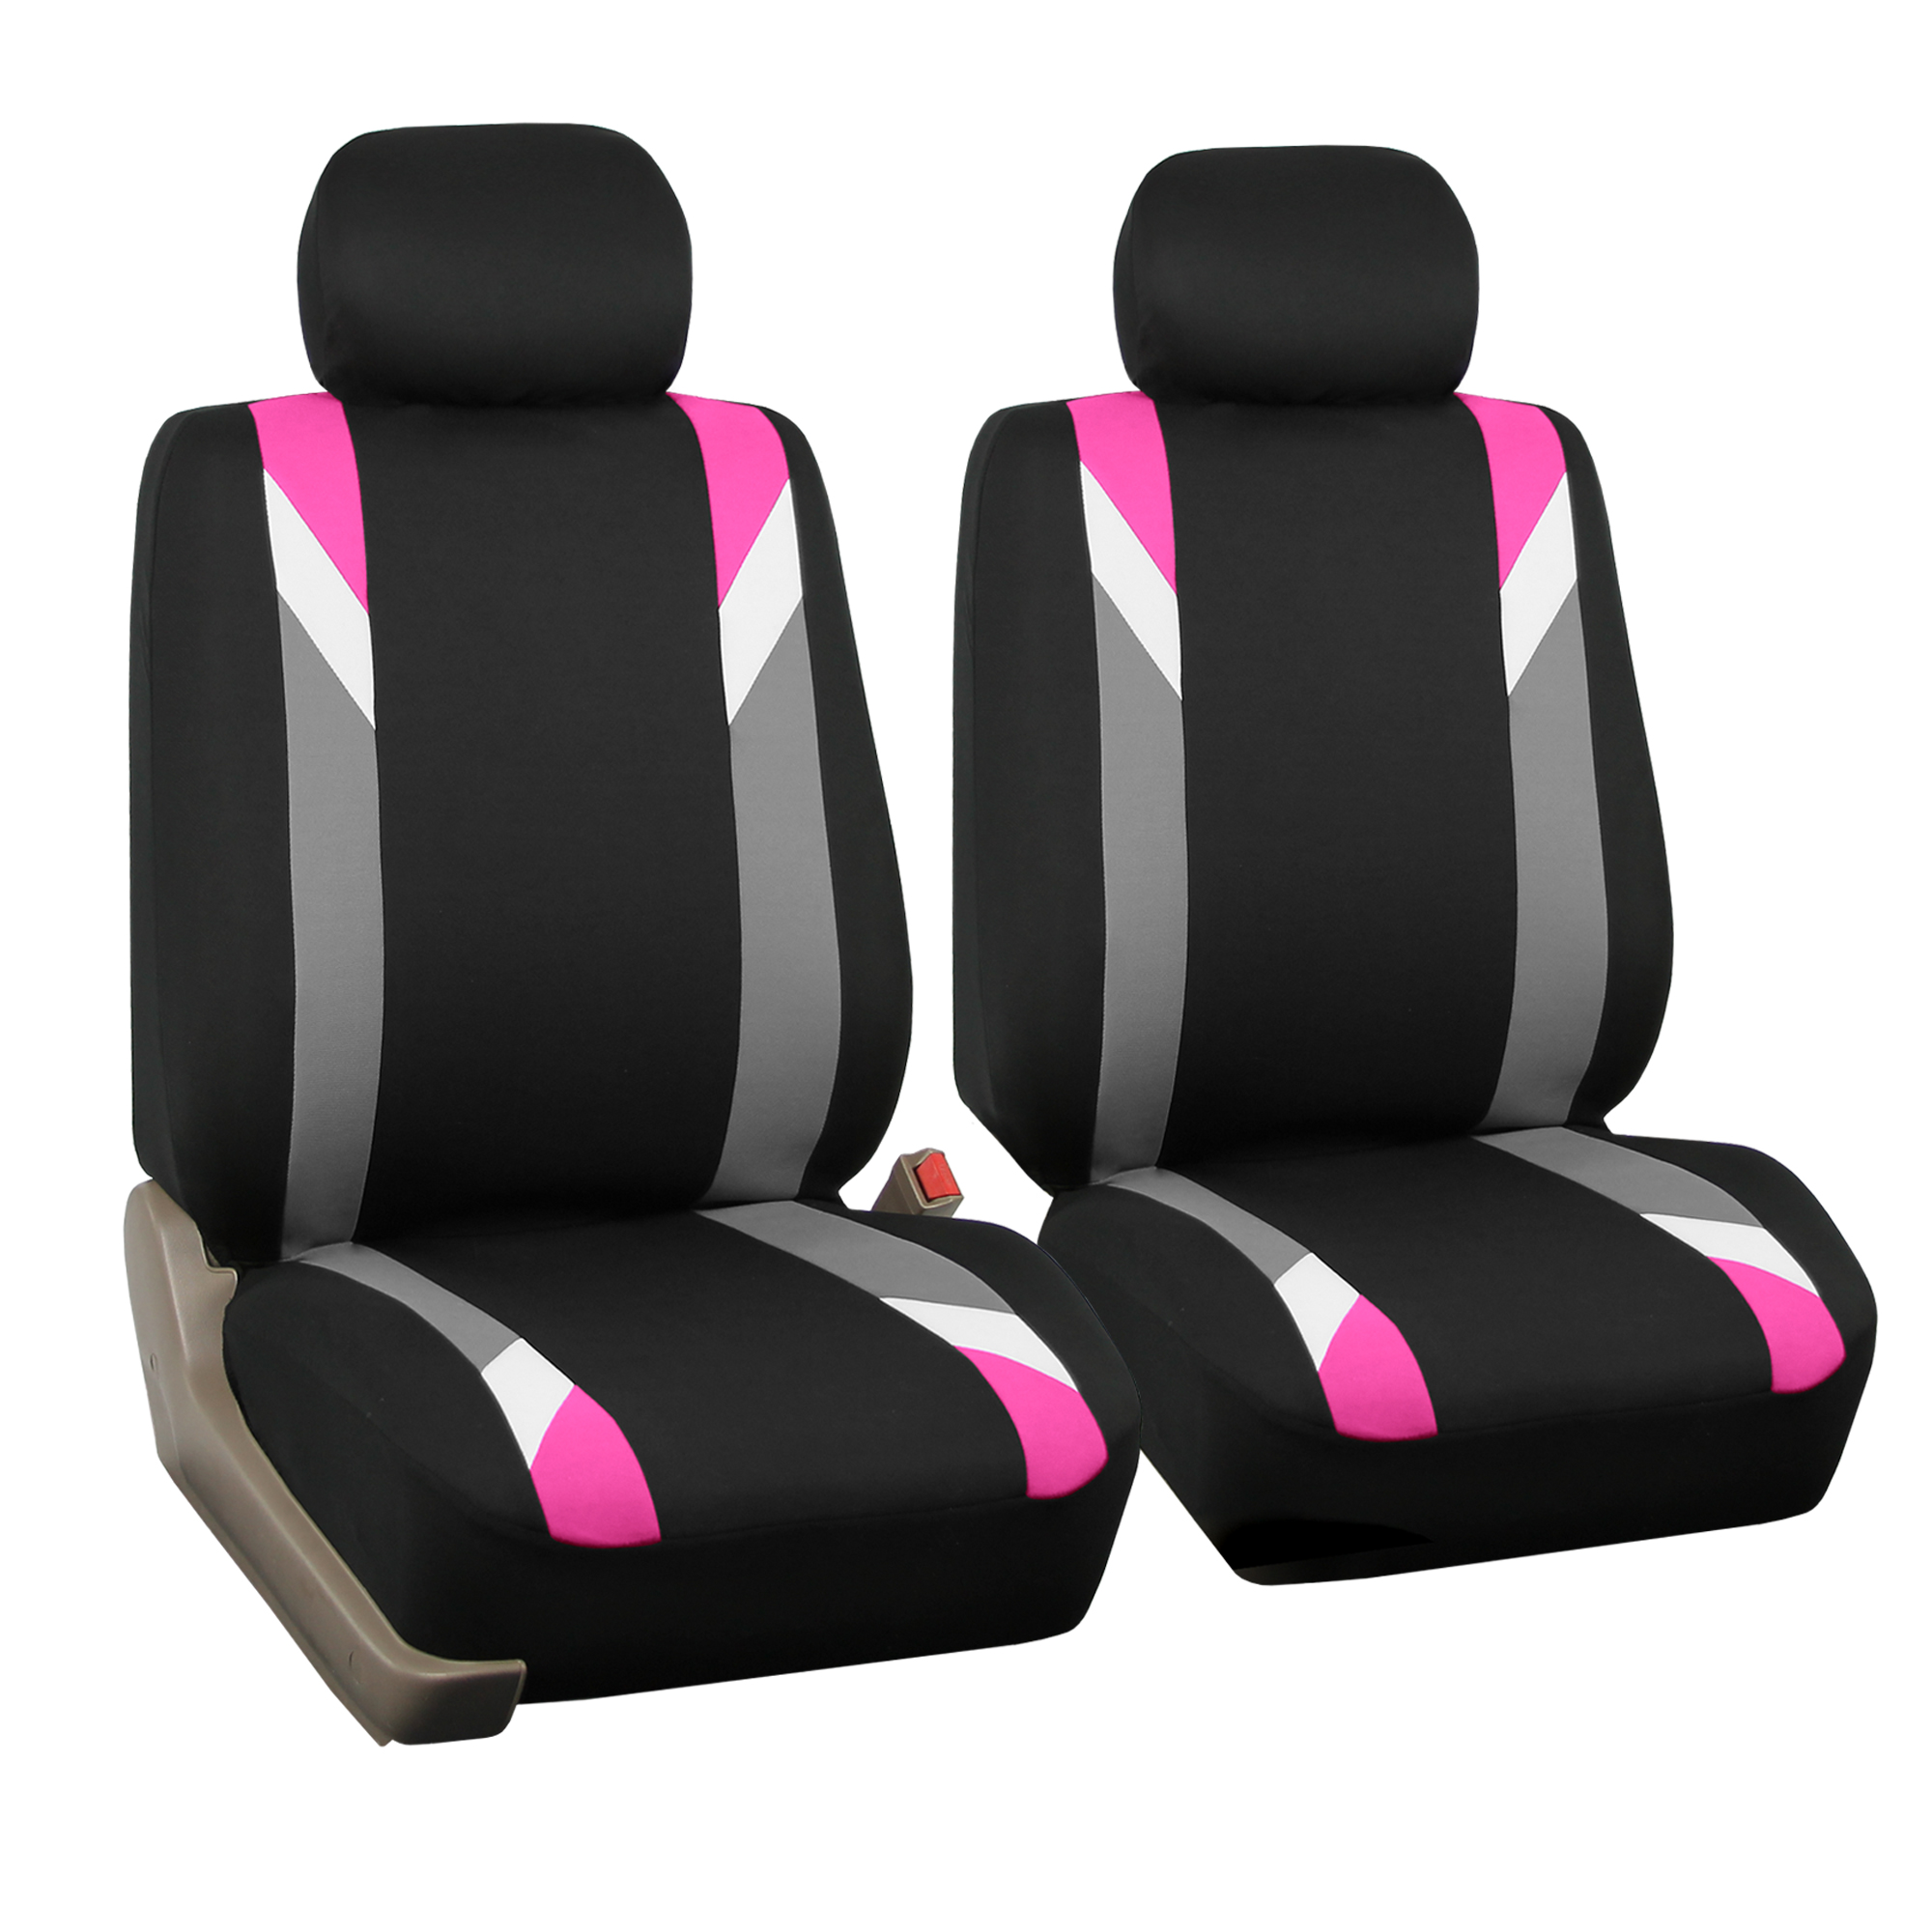 FH Group Premium Modernistic Car Seat Covers Combo, Full Set with Leather Steering Wheel Cover, Pink Black - image 4 of 9